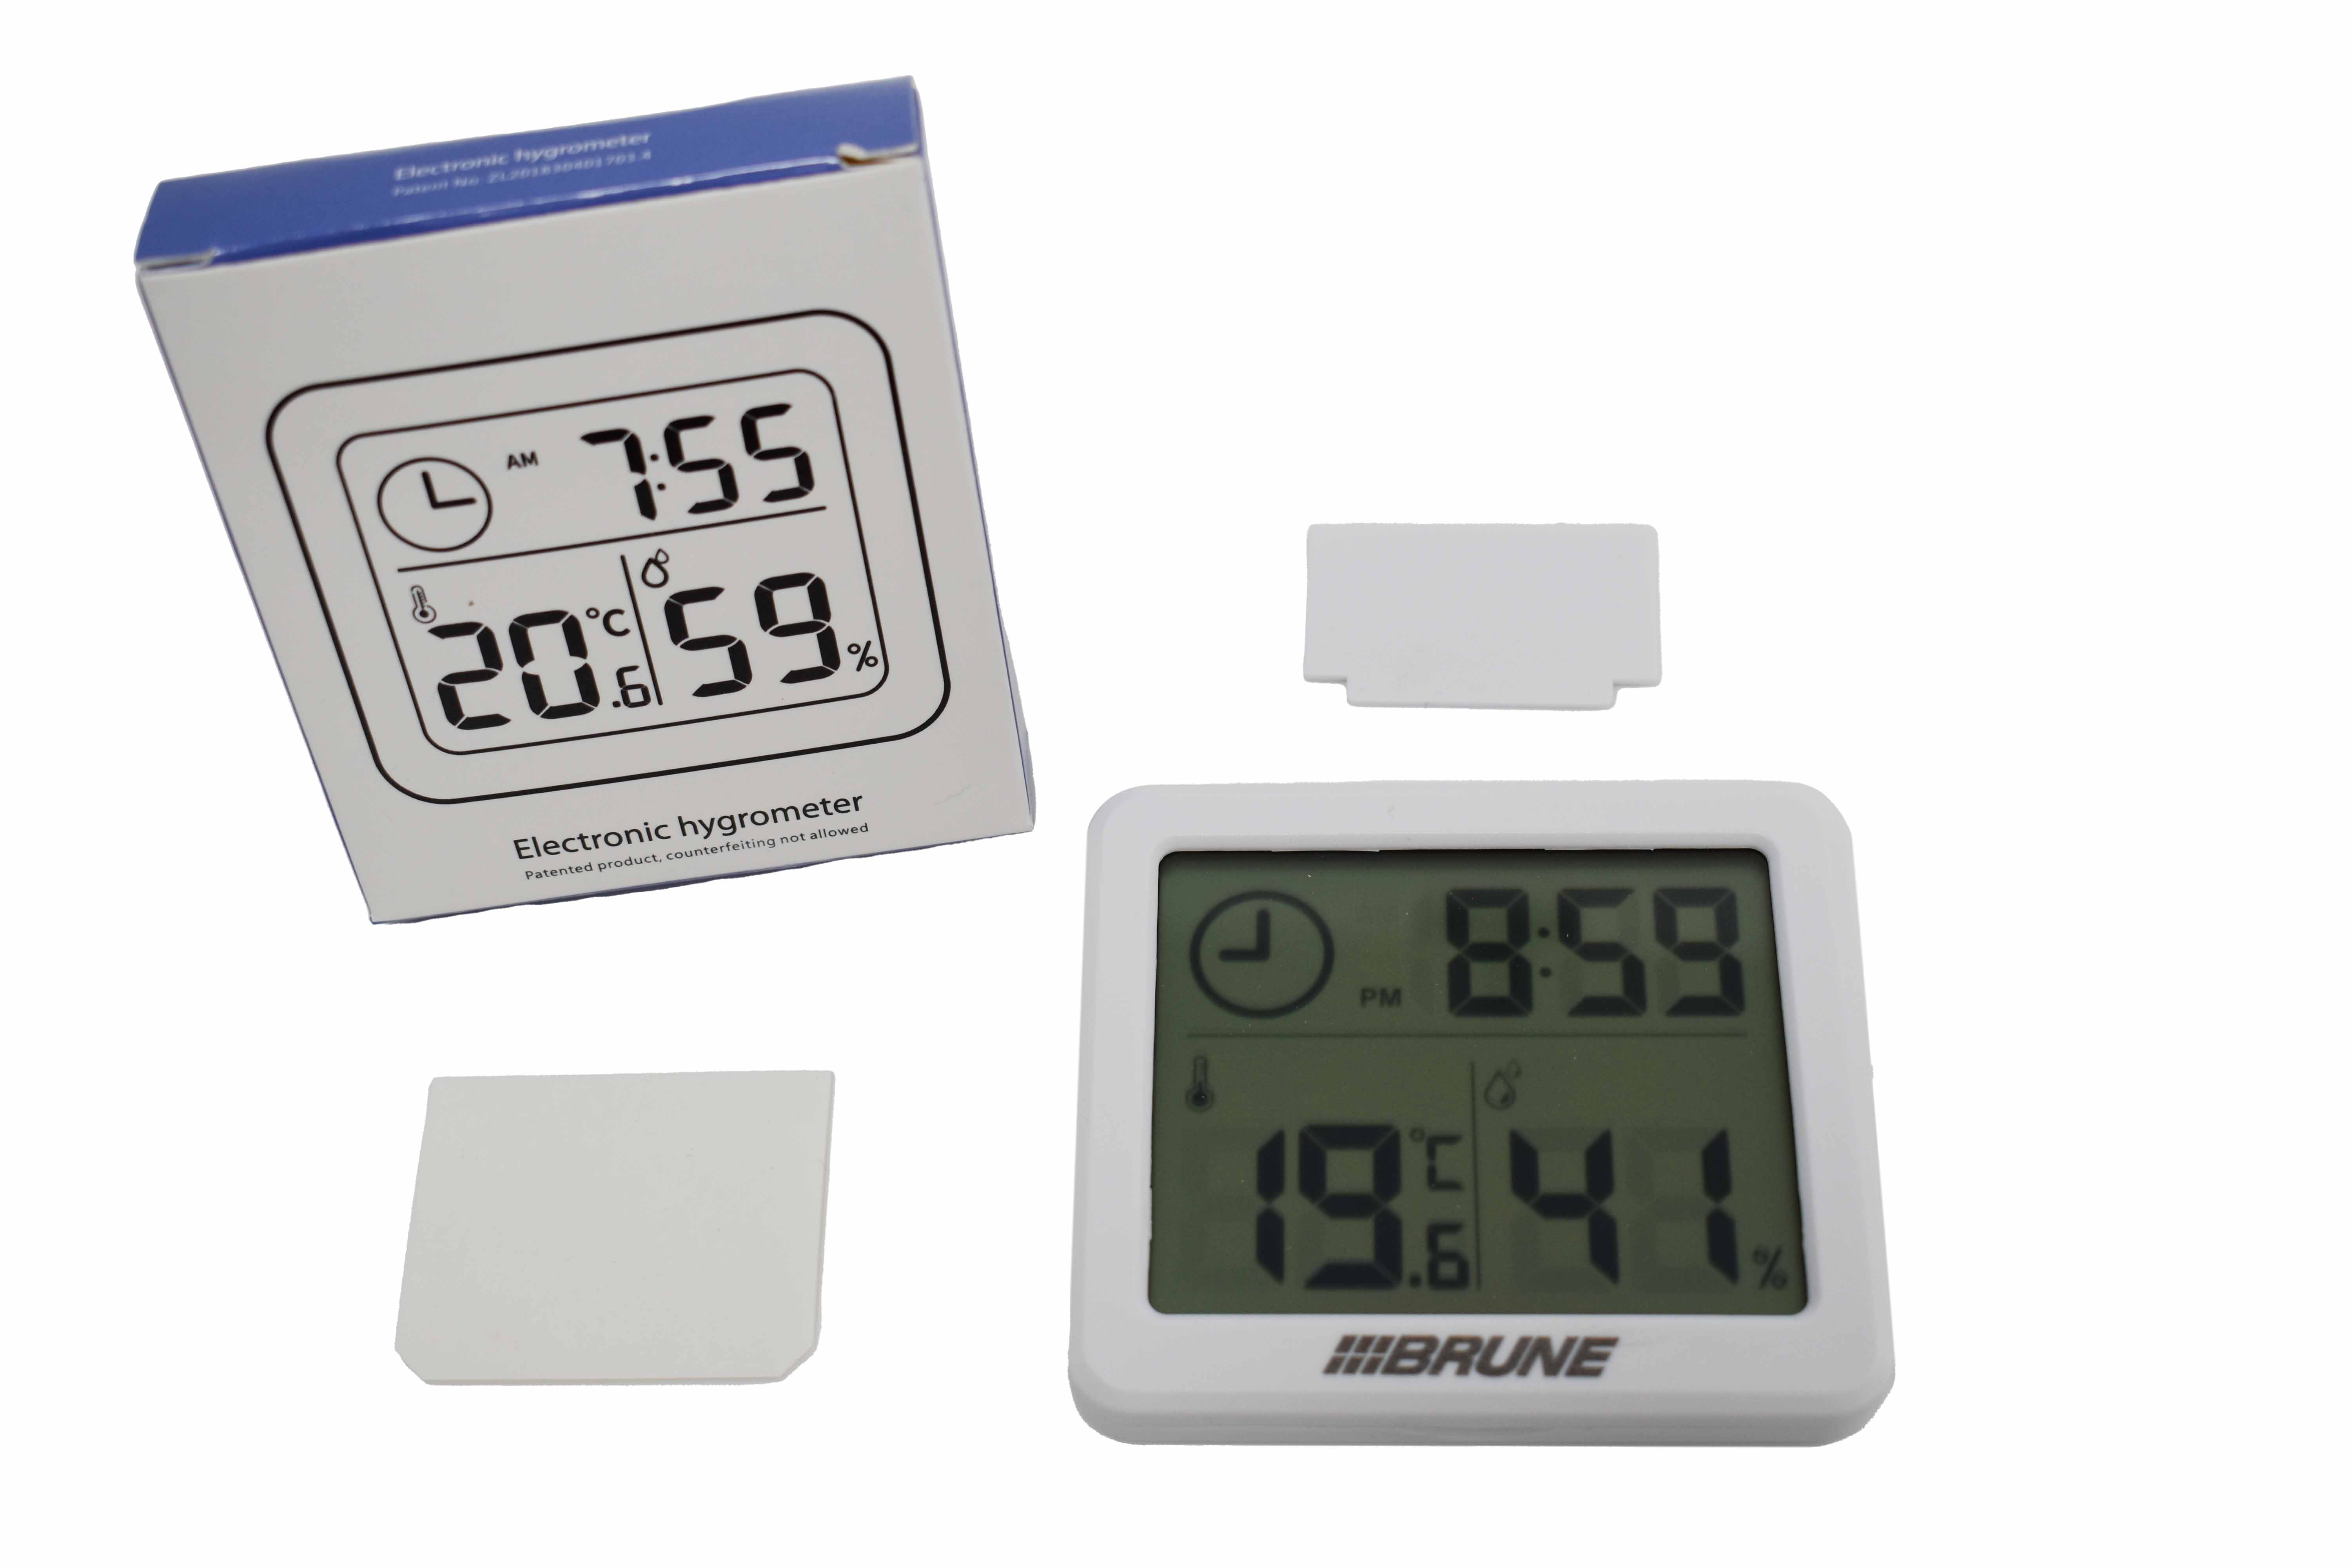 Digital thermo-hygrometer temperature / humidity / time